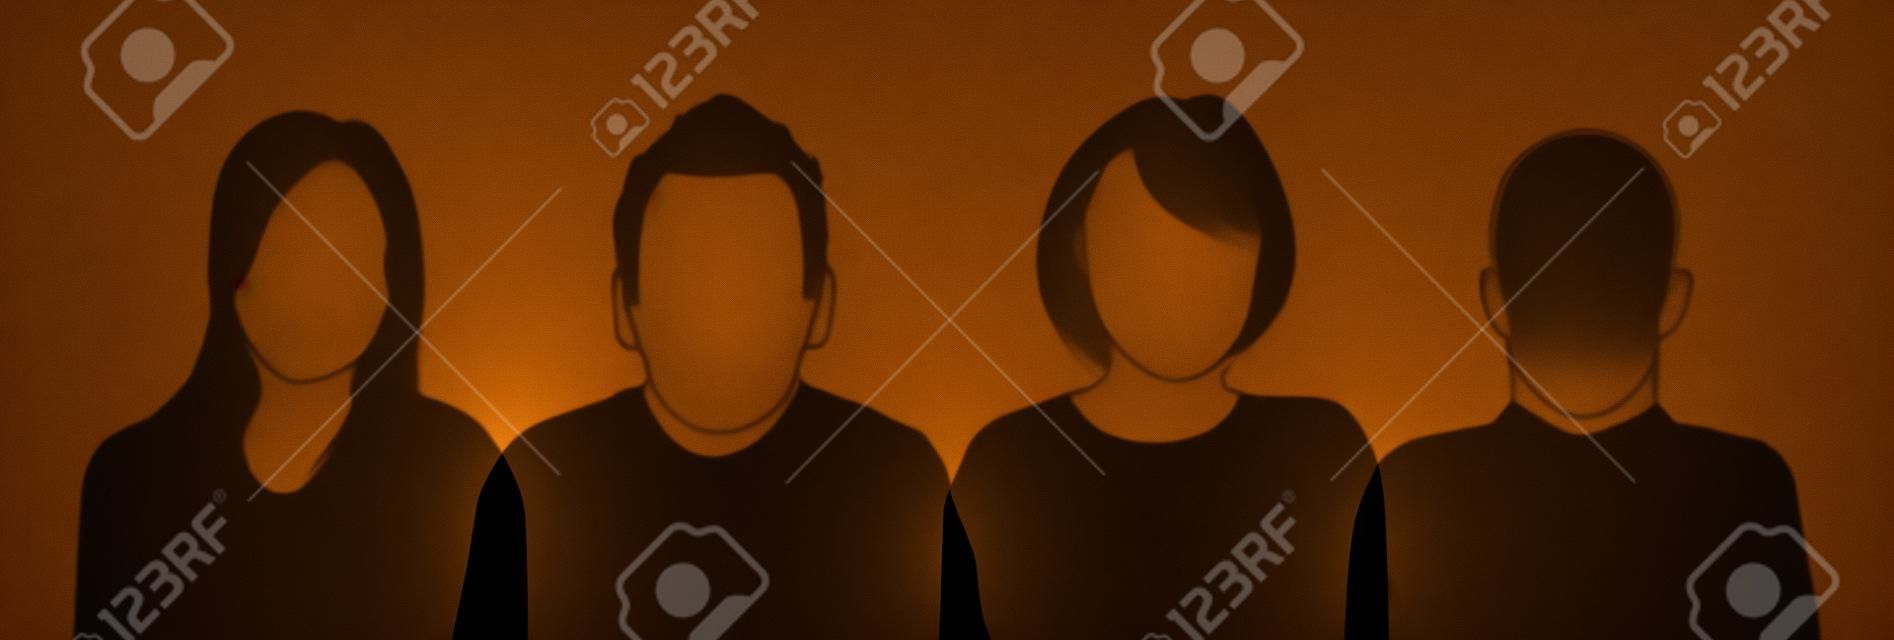 a set of four people silhouettes